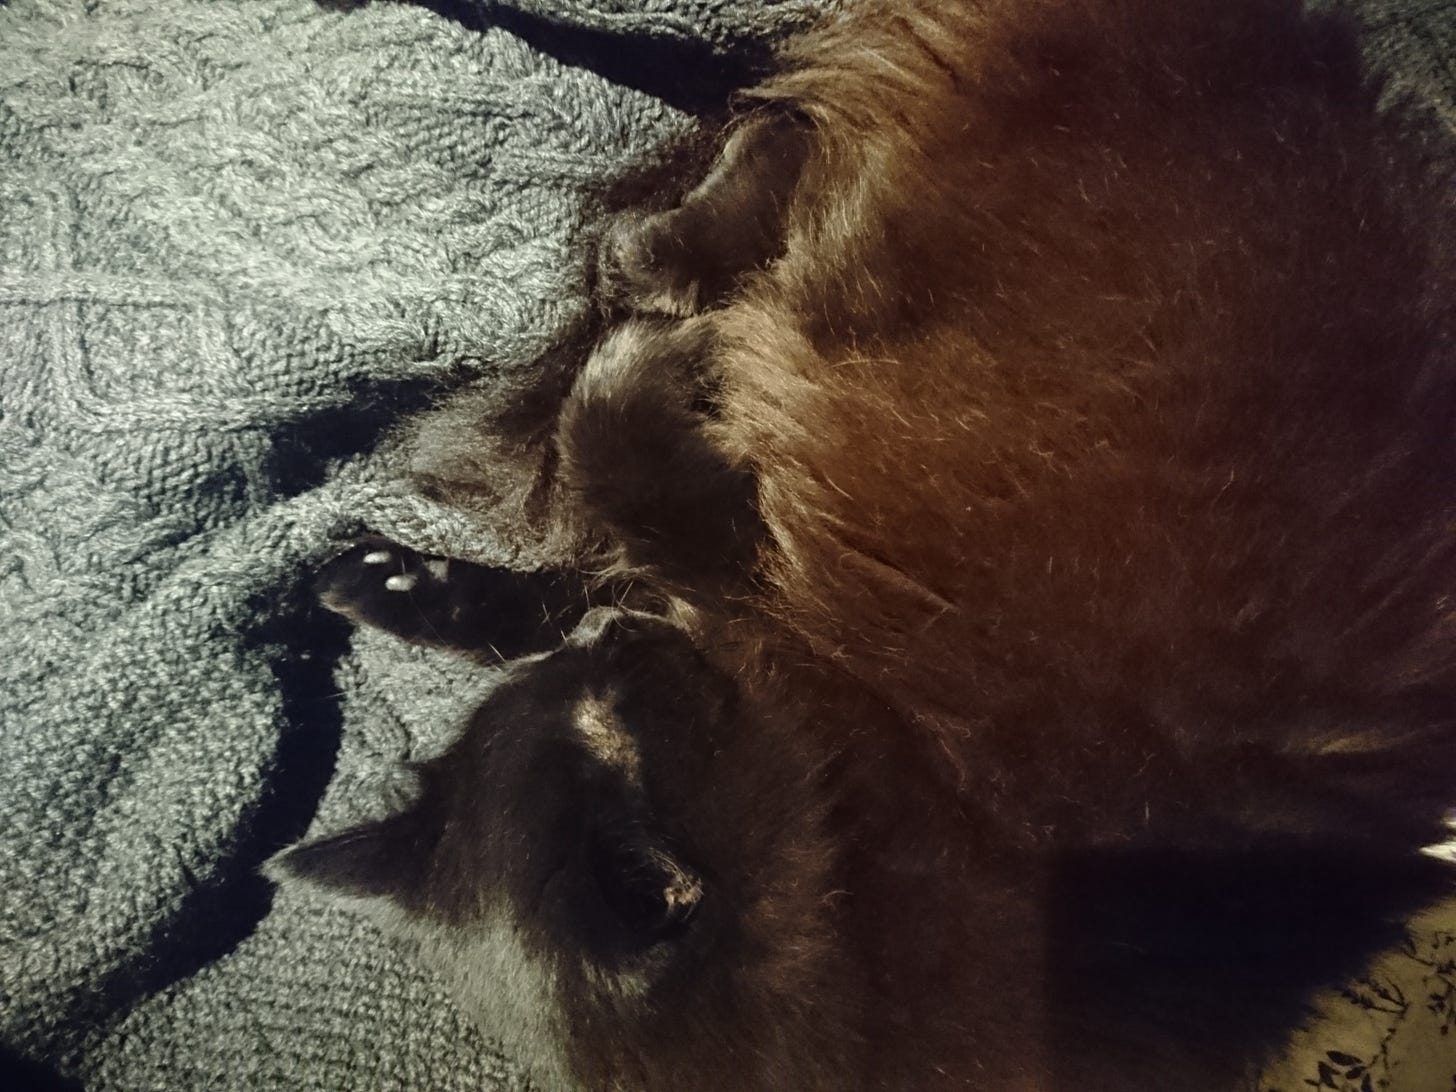 A long haired black cat ctakes up the right half of the frame as she is curled on a charcoal grey aran sweater. The light penetrates her fur turning it a brown hue allowing her curled paws to be seen